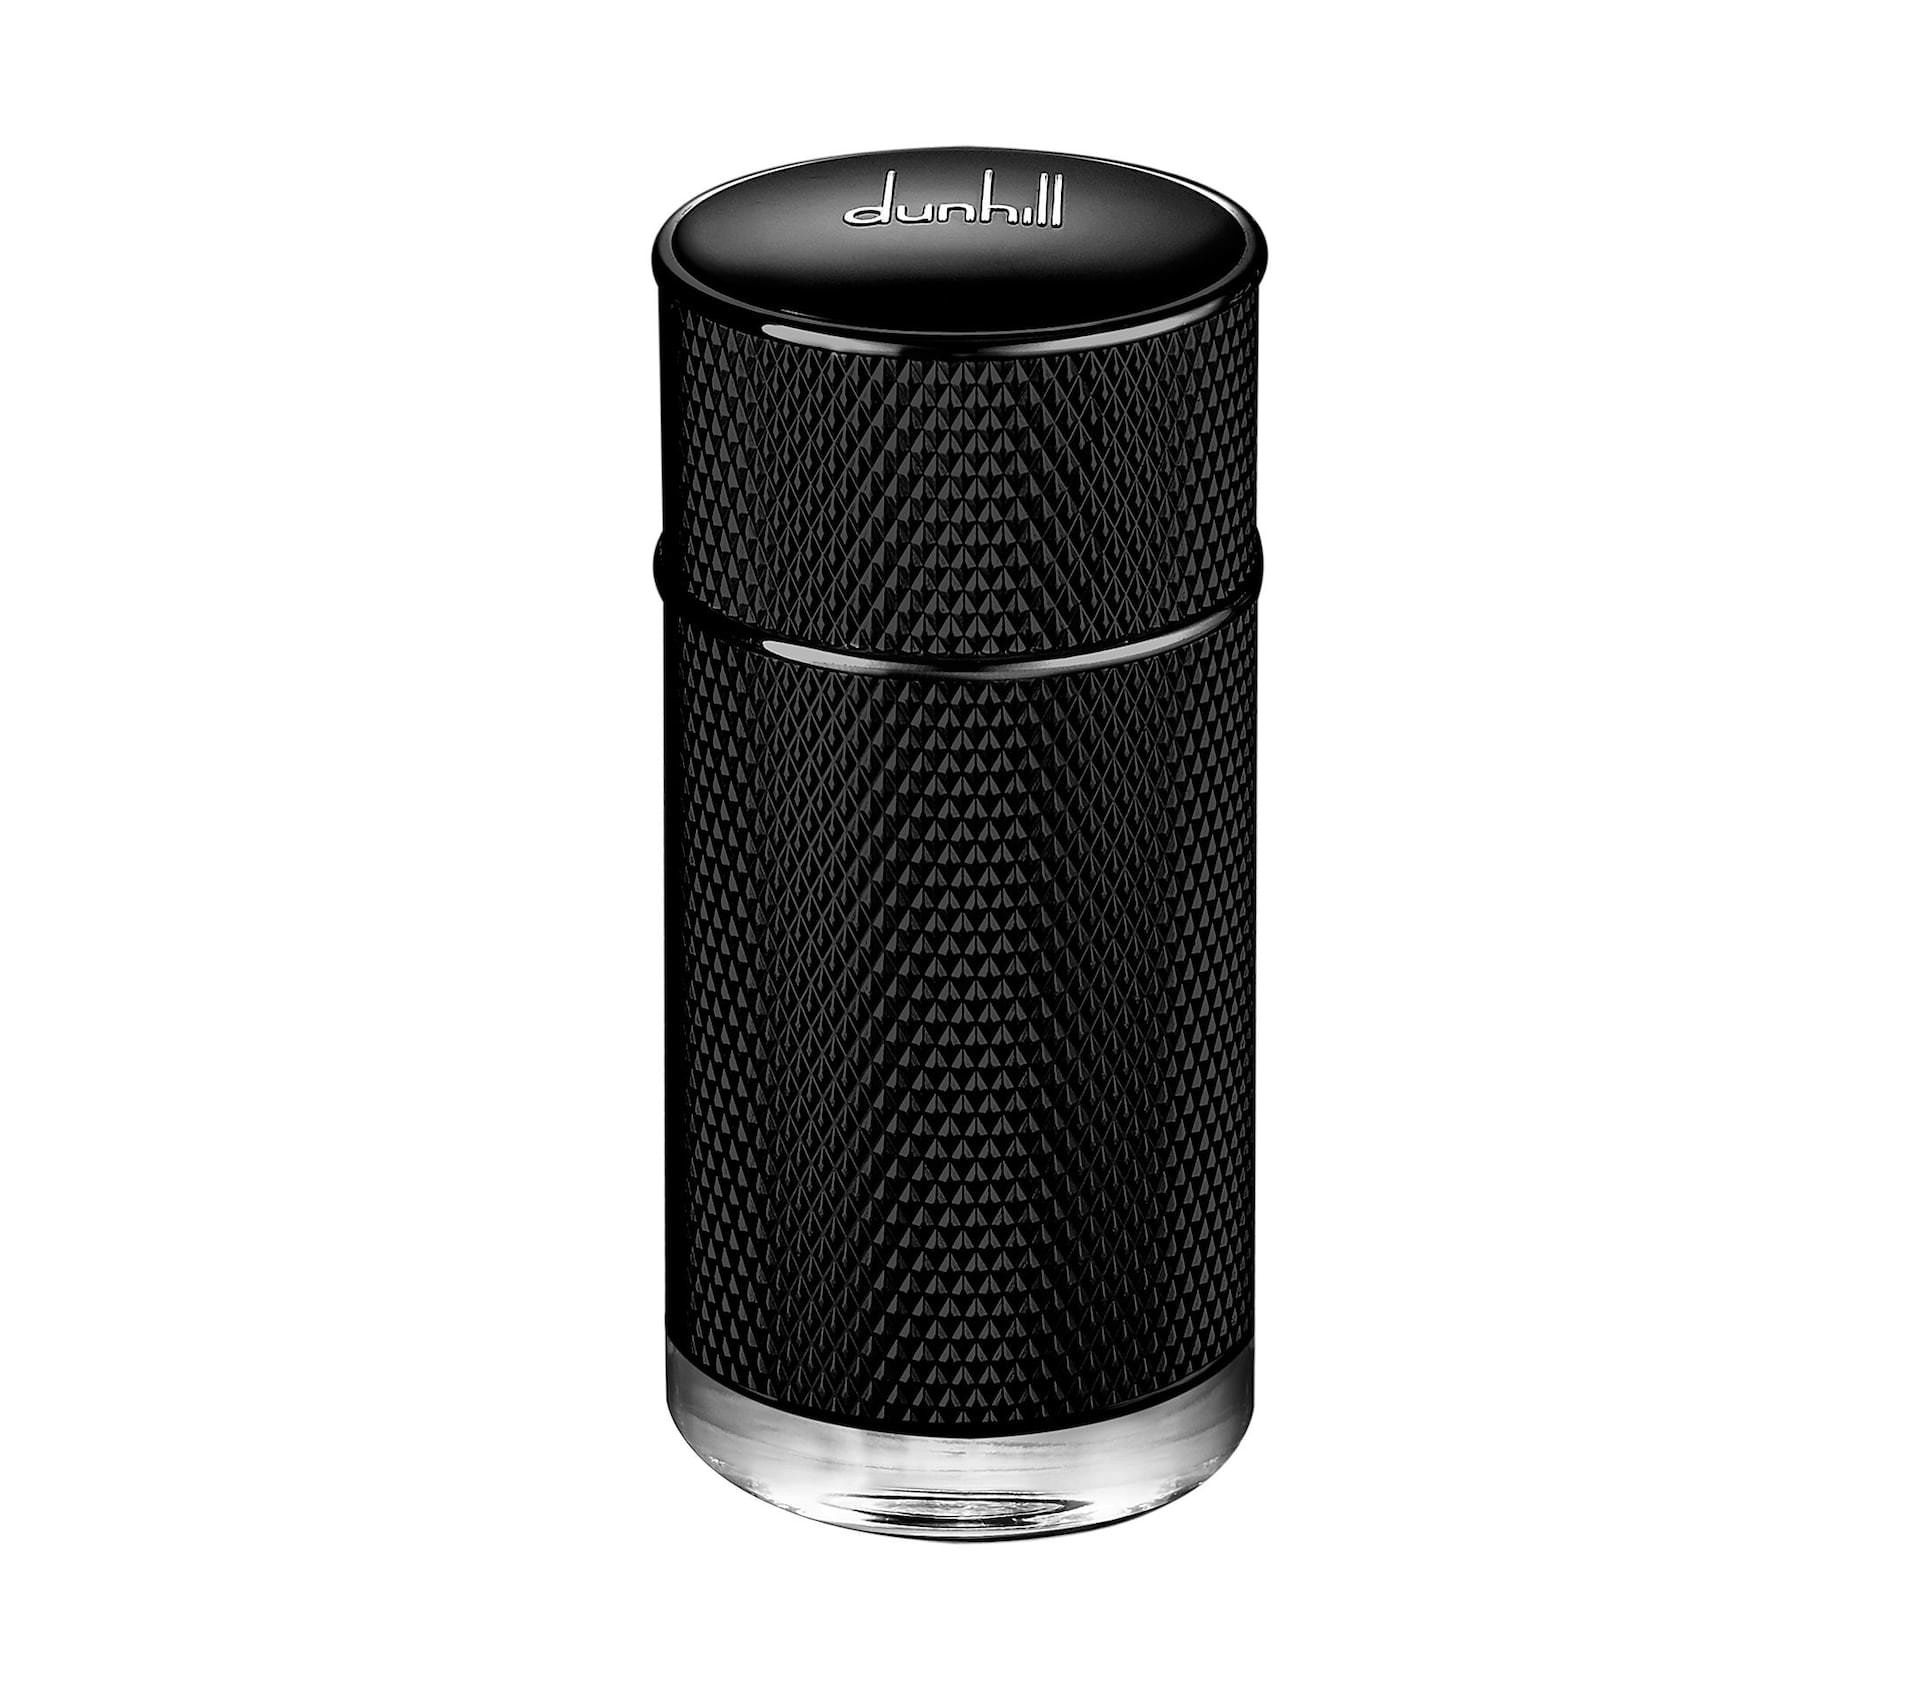 dunhill_icon_black_front iso.jpg